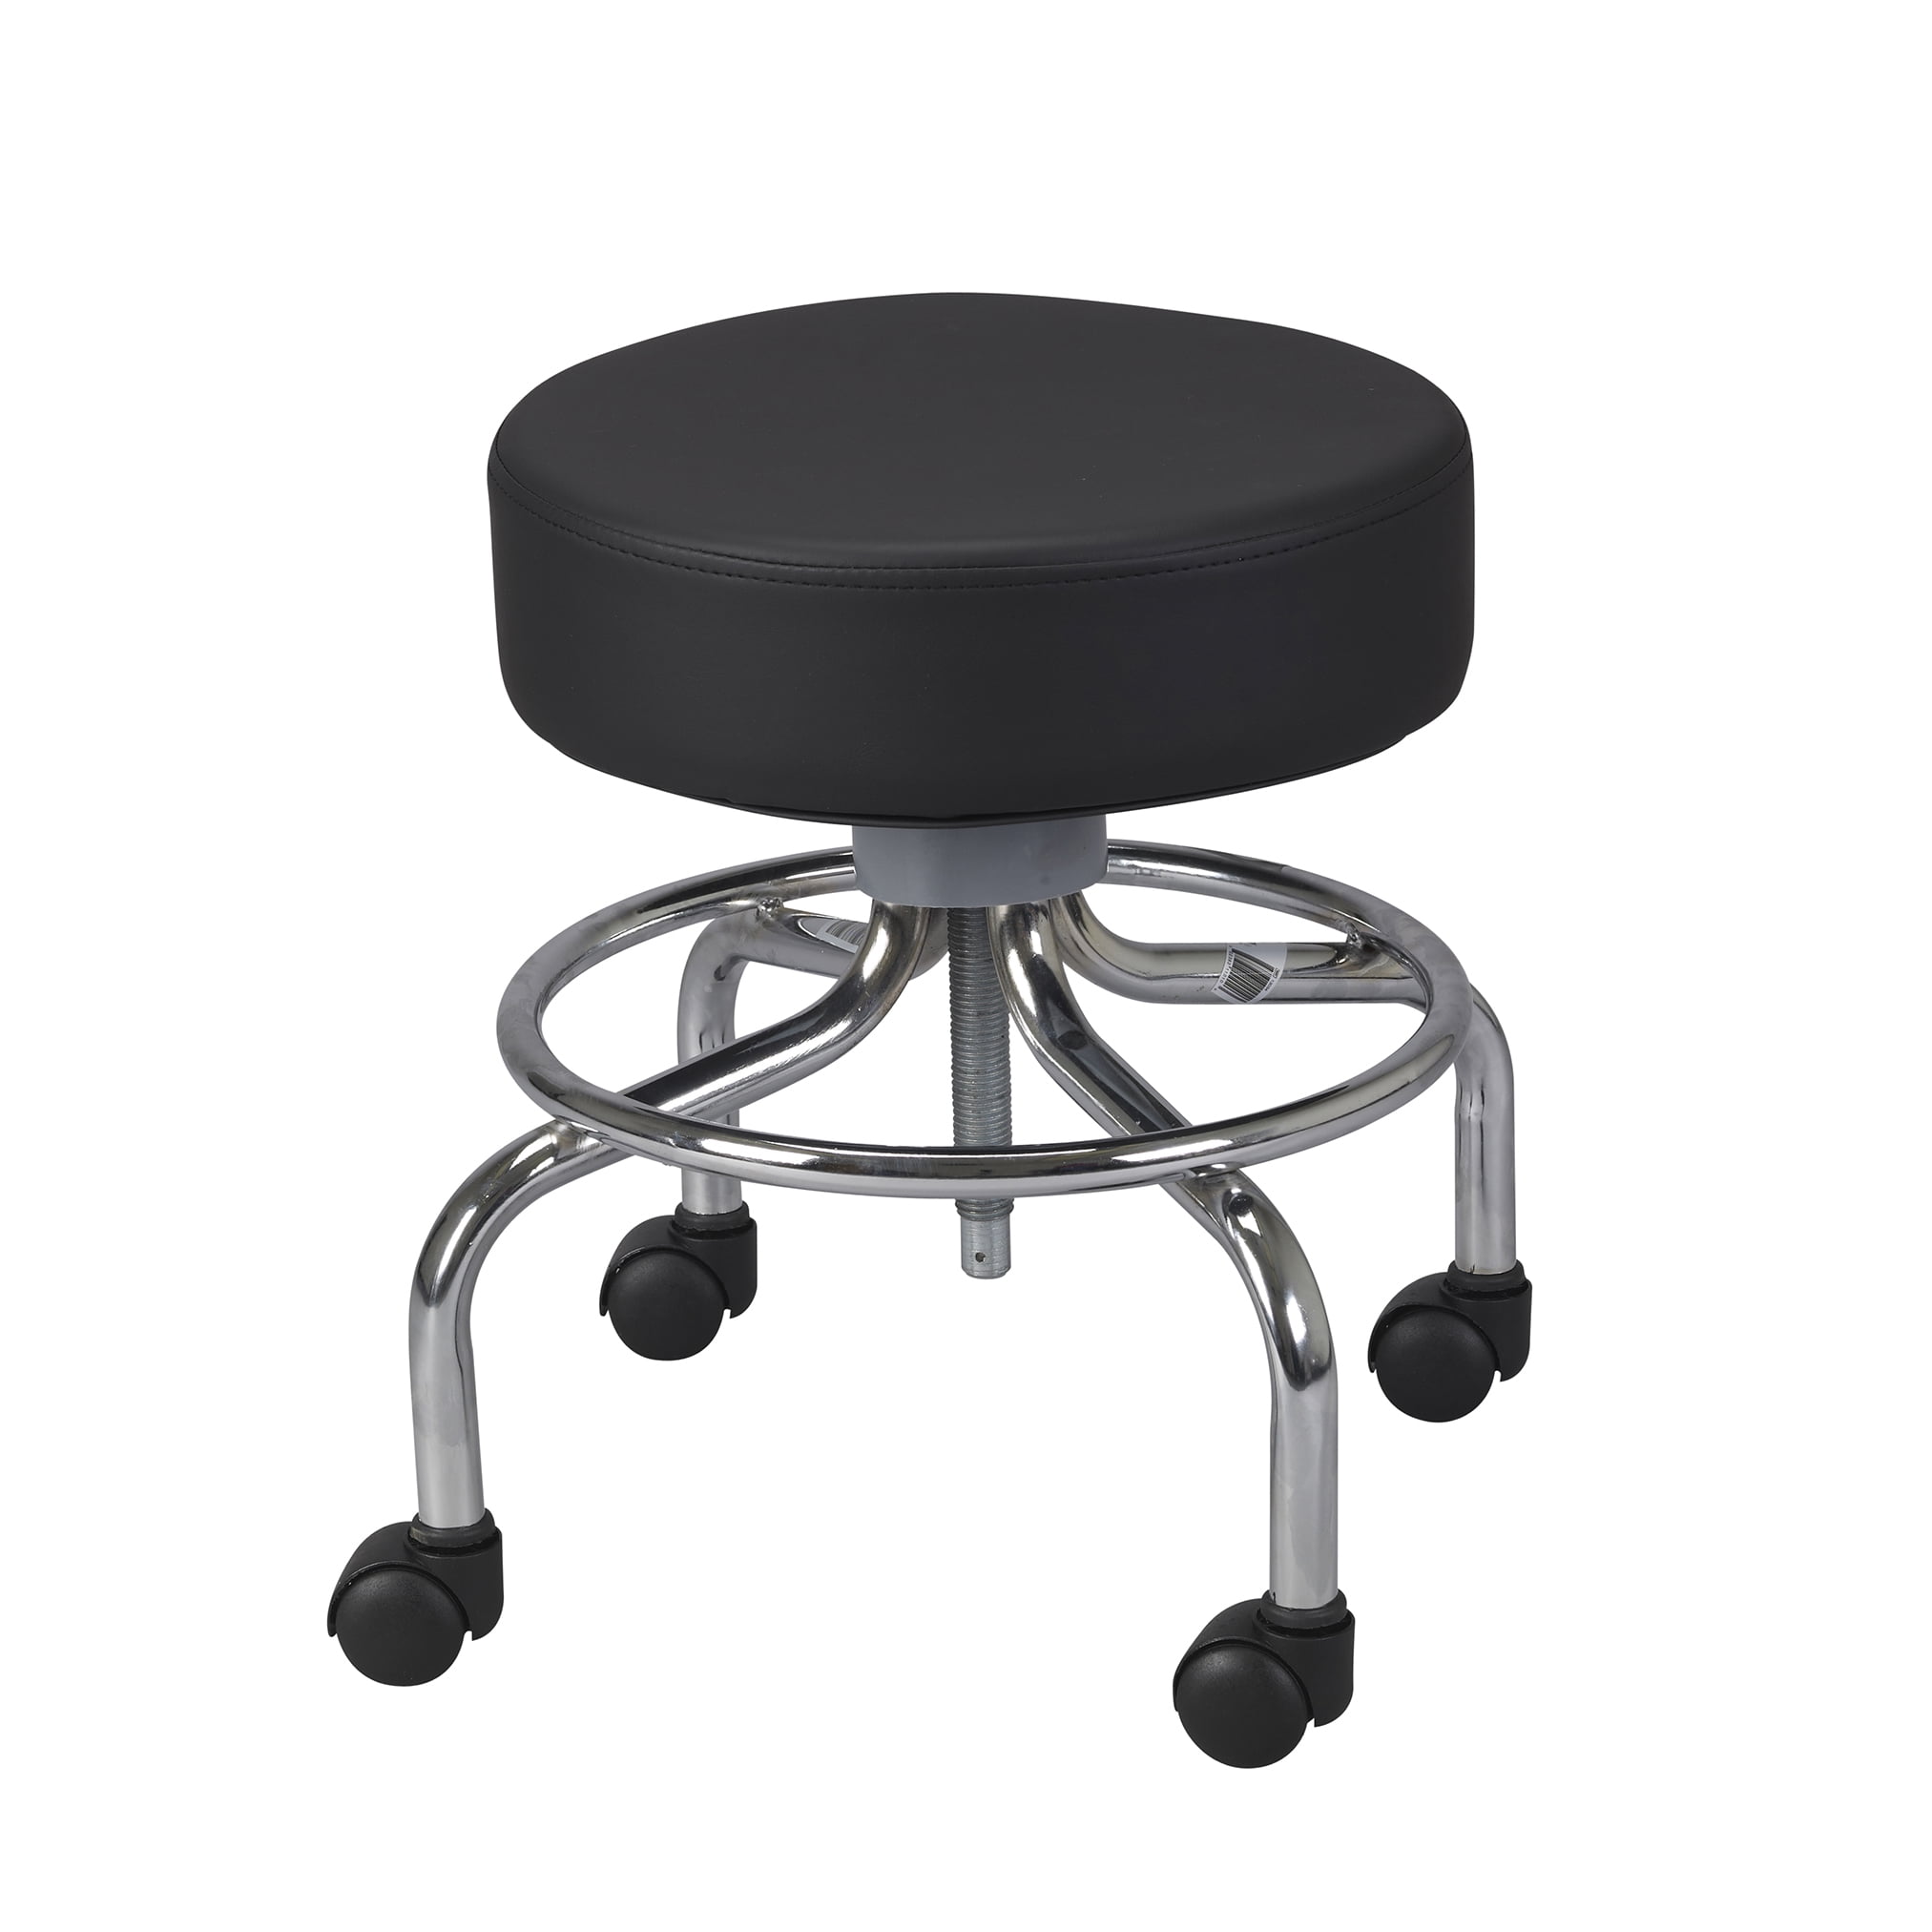 Thick Padded Low Seat Footrest 33 12cm Small Round Stool for Working On The Ground Can Rotate with Wheels